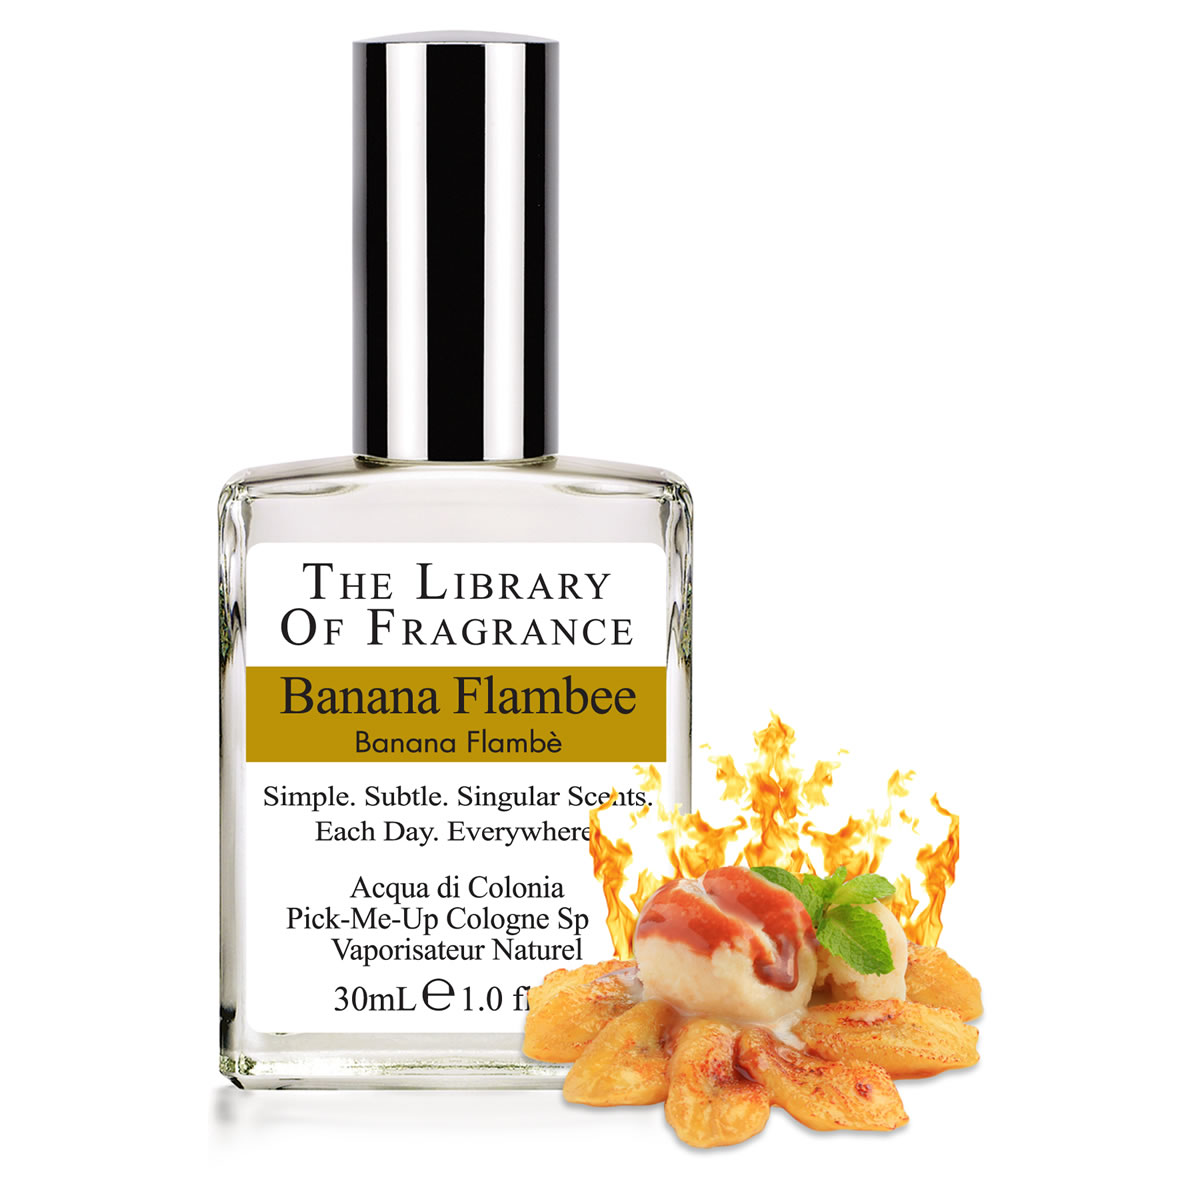 Image of The Library Of Fragrance Banana Flambee Fragrance 30ml